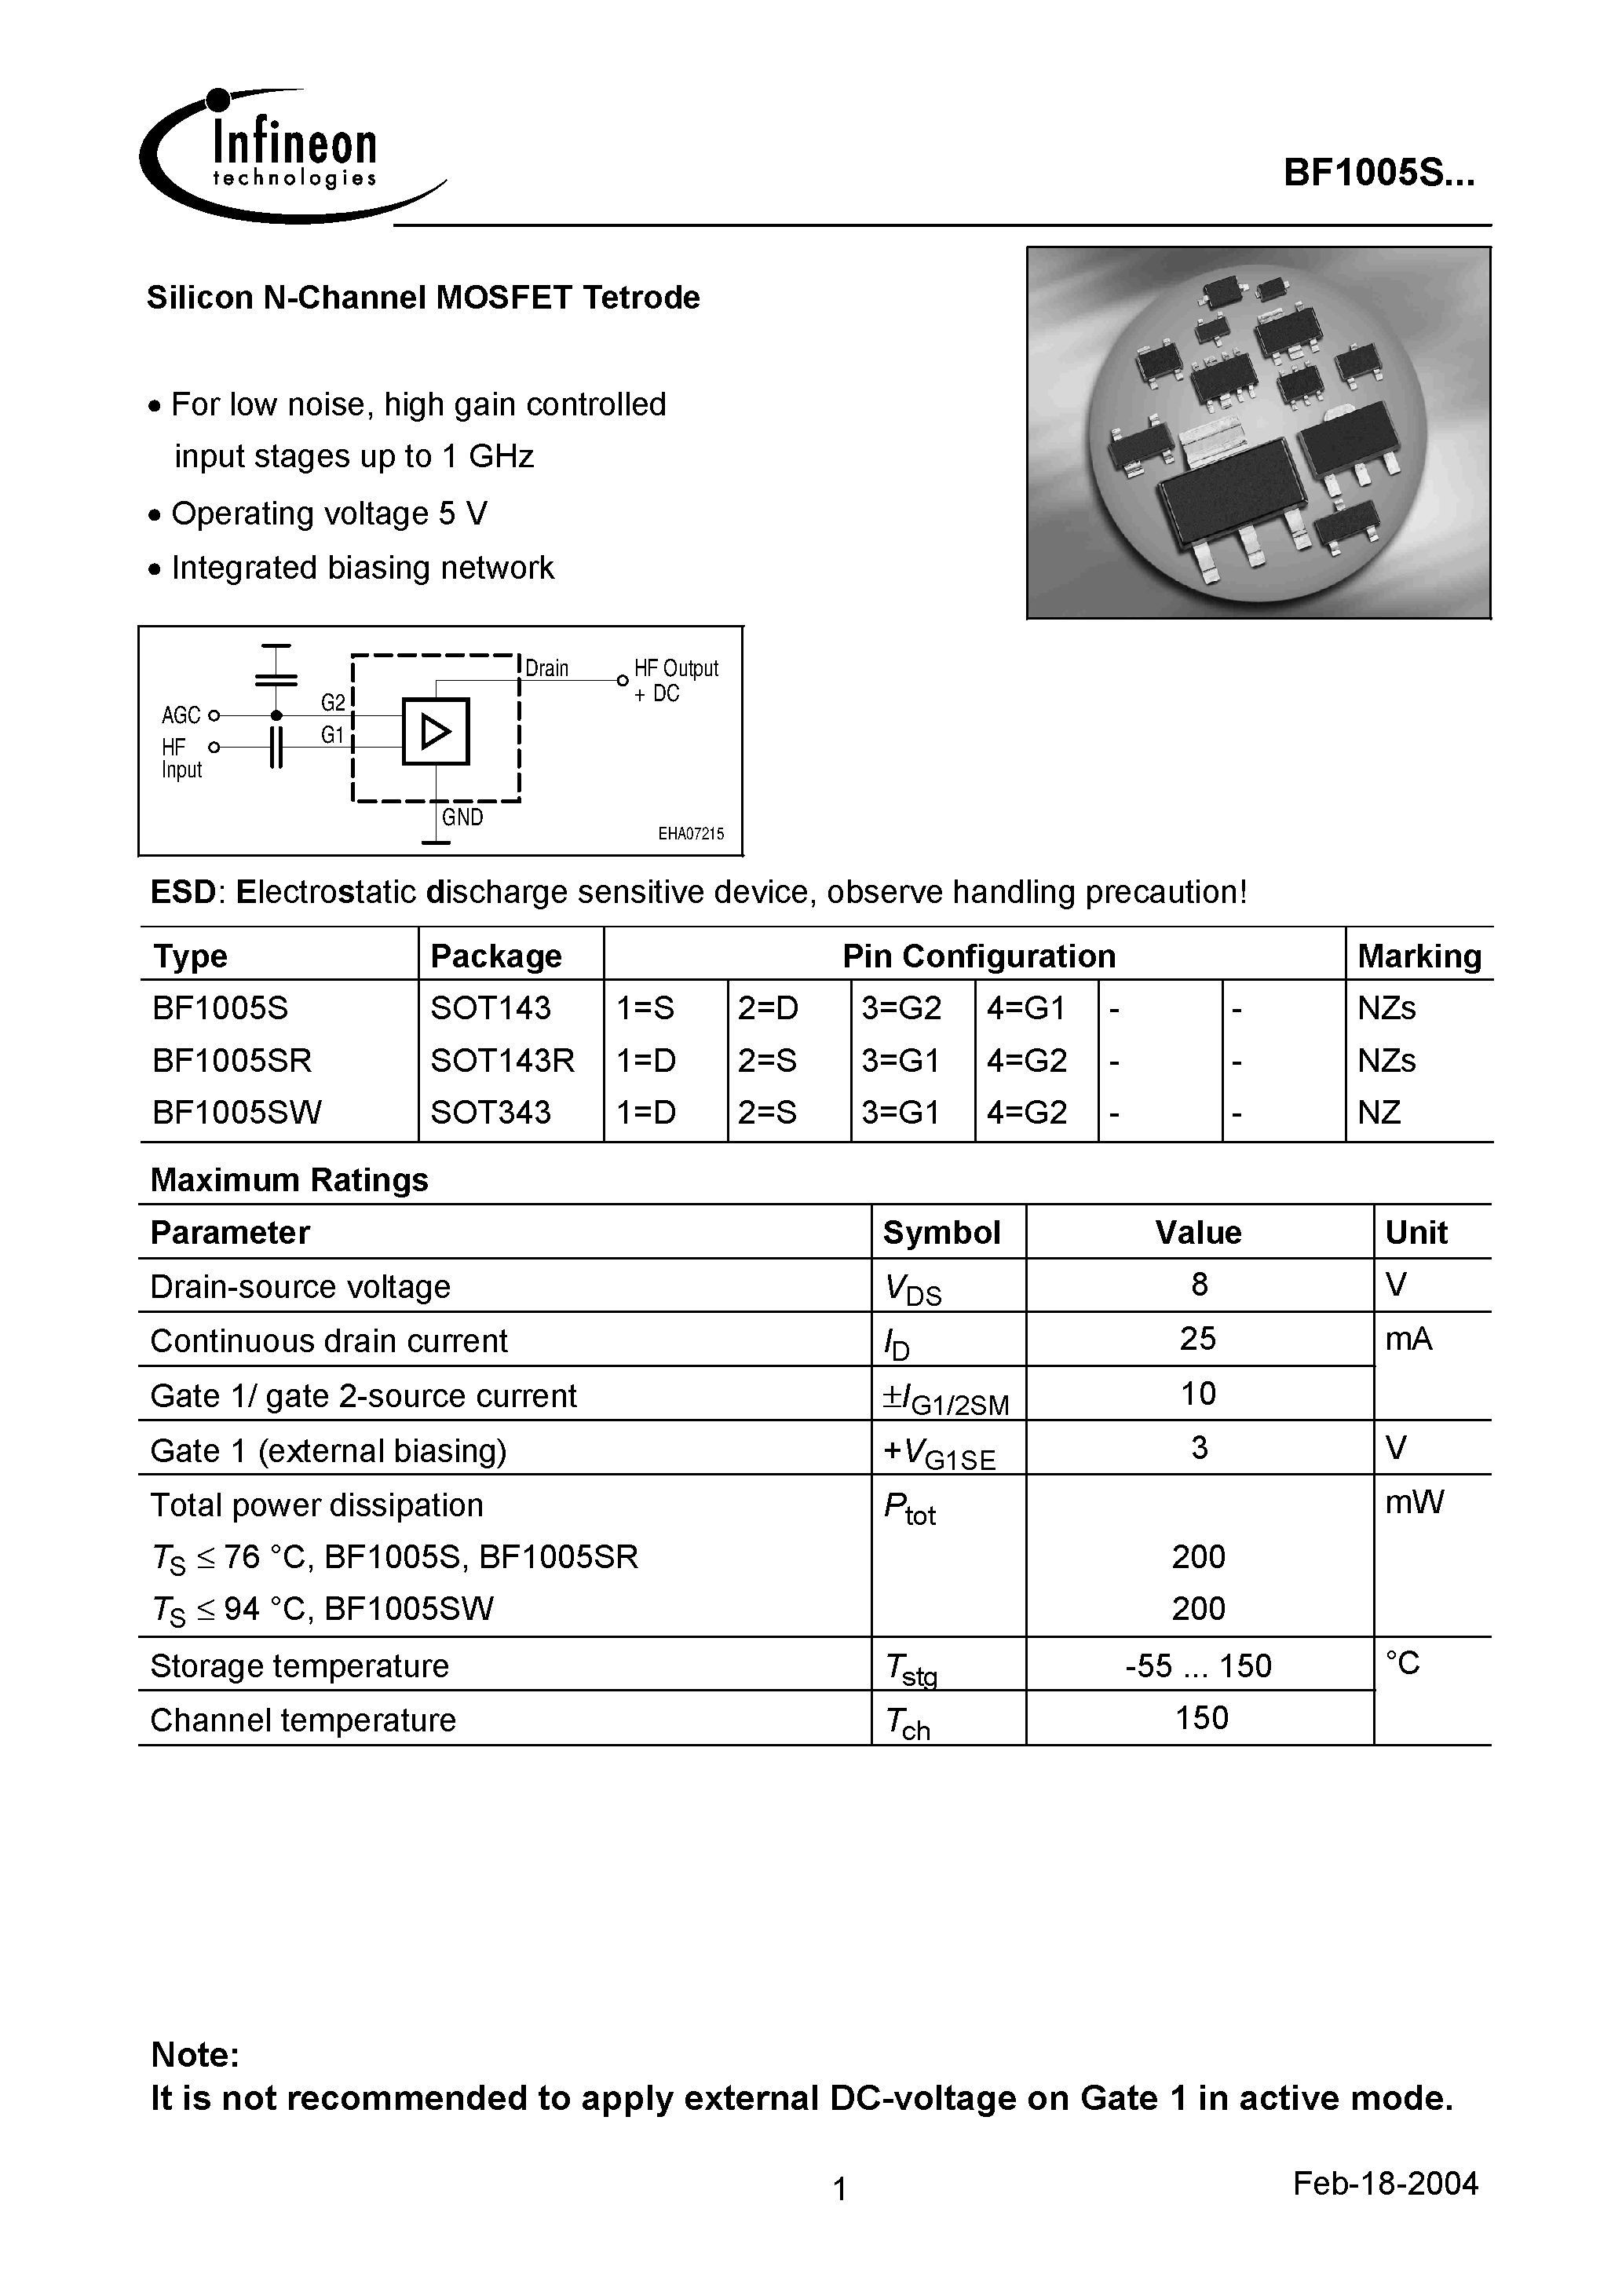 Datasheet BF1005SR - Silicon N-Channel MOSFET Tetrode page 1